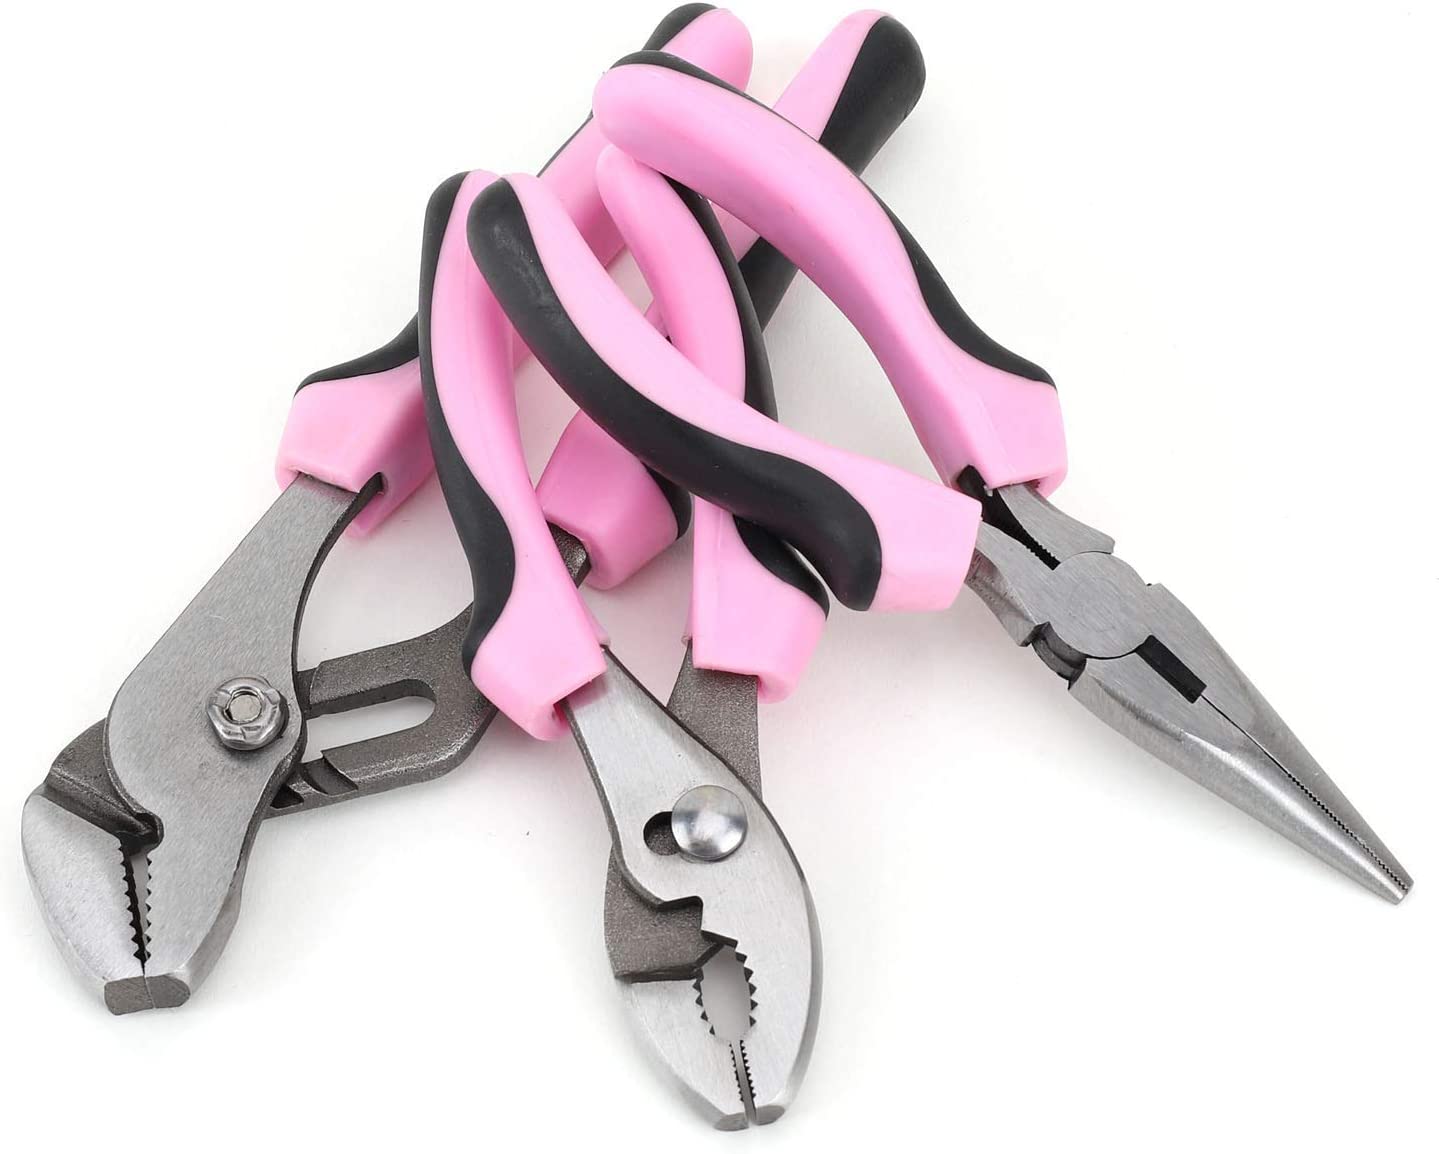 Three pink and black ladies DIY tools are laid out on a white background.